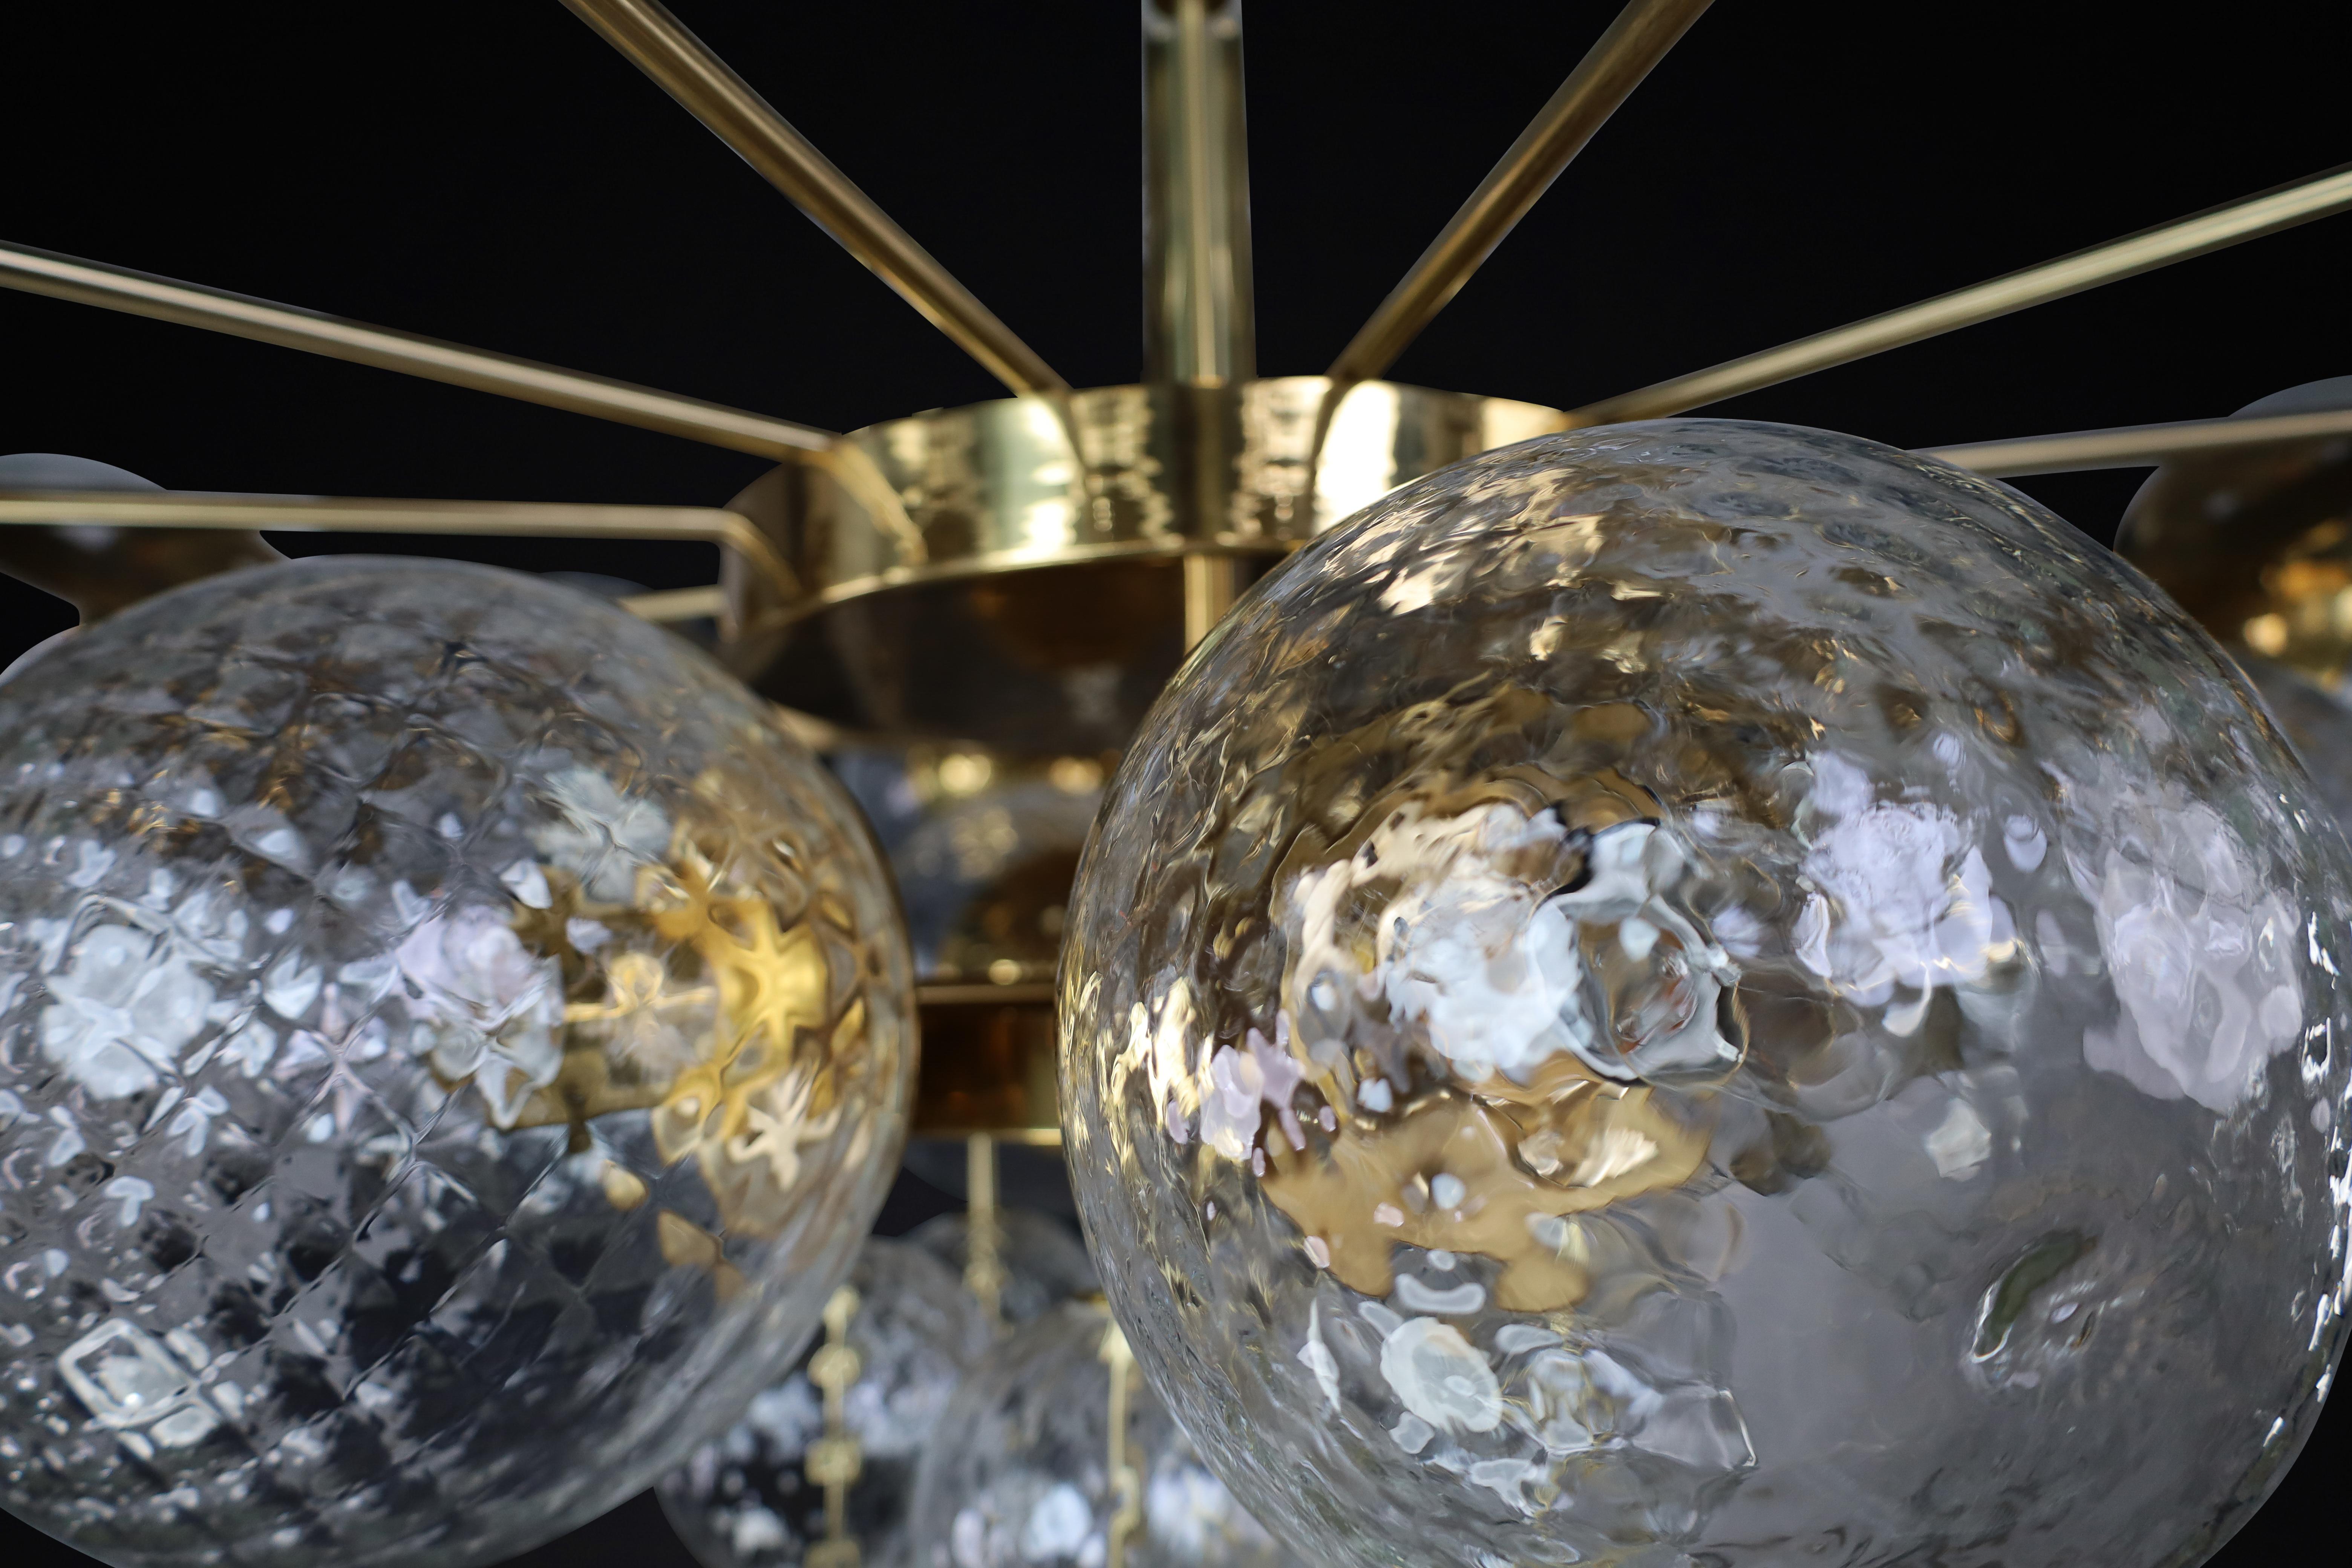 Brass Large Chandelier with brass fixture and hand-blowed glass globes by Preciosa Cz. For Sale